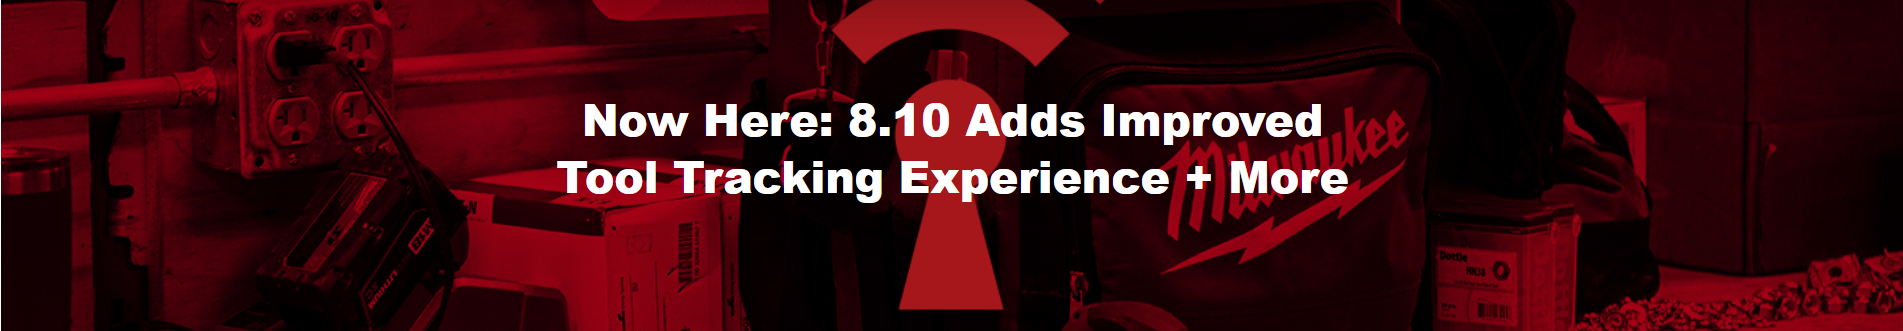 Now Here: 8.10 Adds Improved Tool Tracking Experience + More